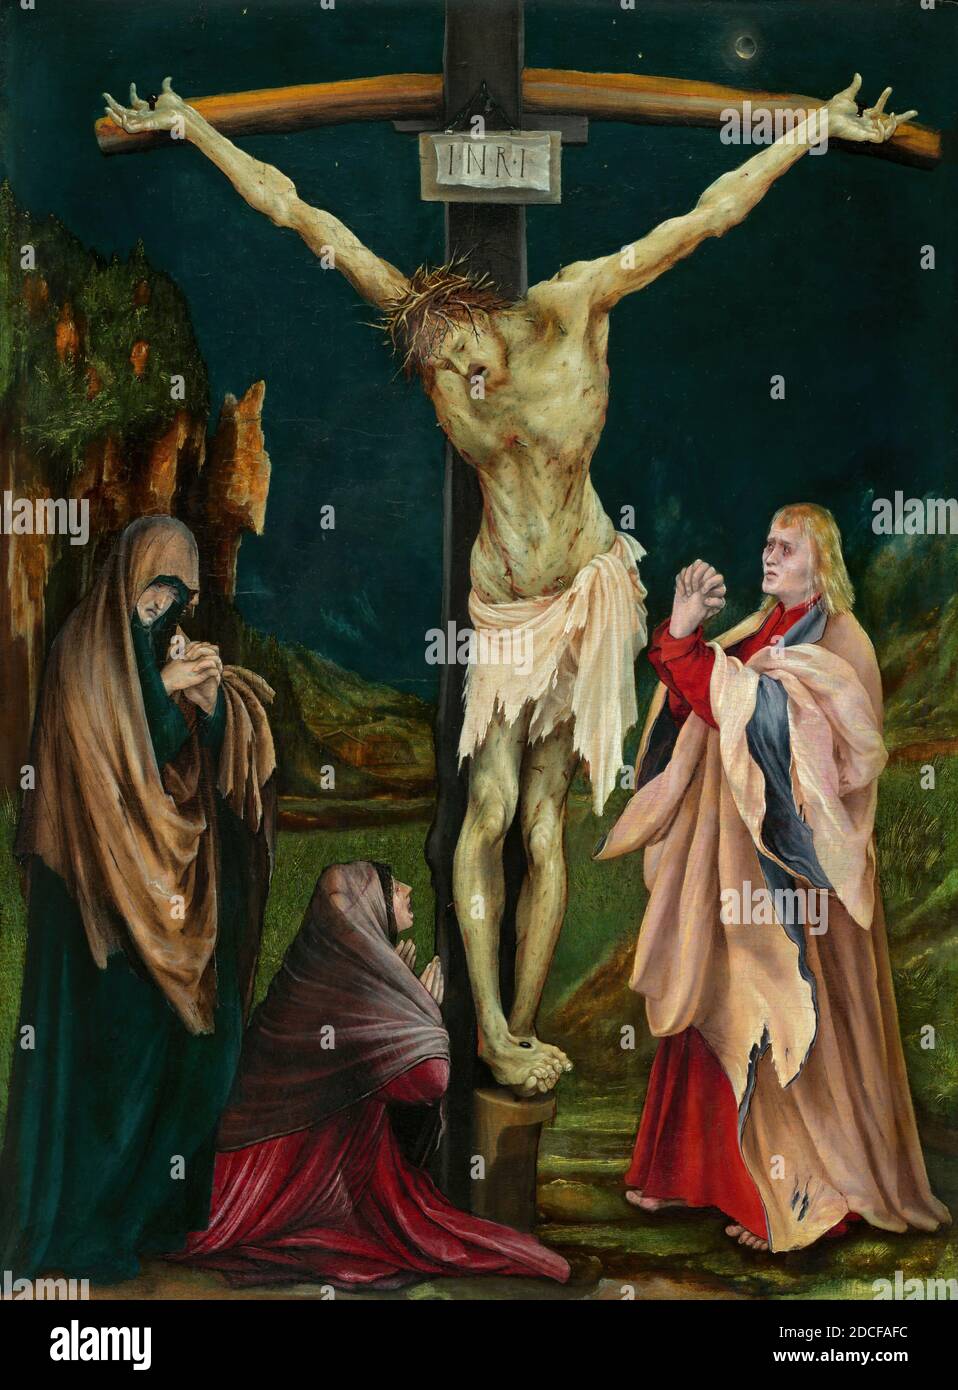 Matthias Grünewald, (artist), German, c. 1475/1480 - 1528, The Small Crucifixion, c. 1511/1520, oil on panel, overall: 61.3 x 46 cm (24 1/8 x 18 1/8 in.), framed: 74.4 x 59 x 2.5 cm (29 5/16 x 23 1/4 x 1 in Stock Photo